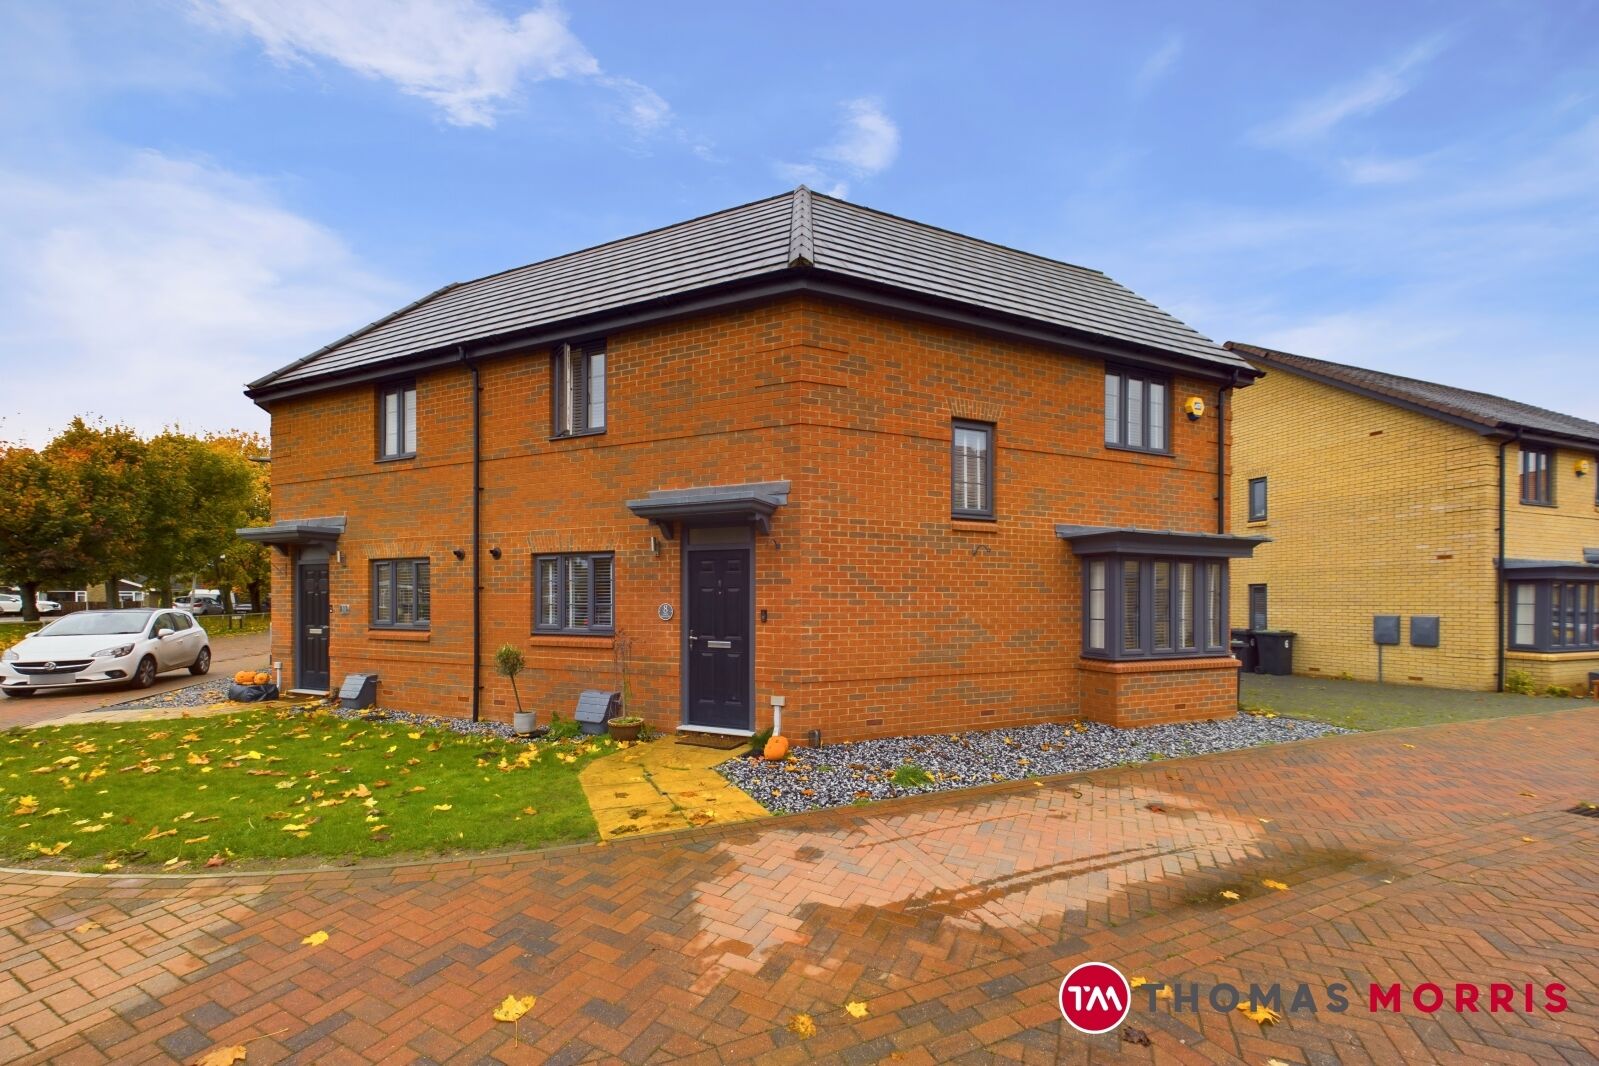 3 bedroom semi detached house for sale Chew Meadow, Biggleswade, SG18, main image